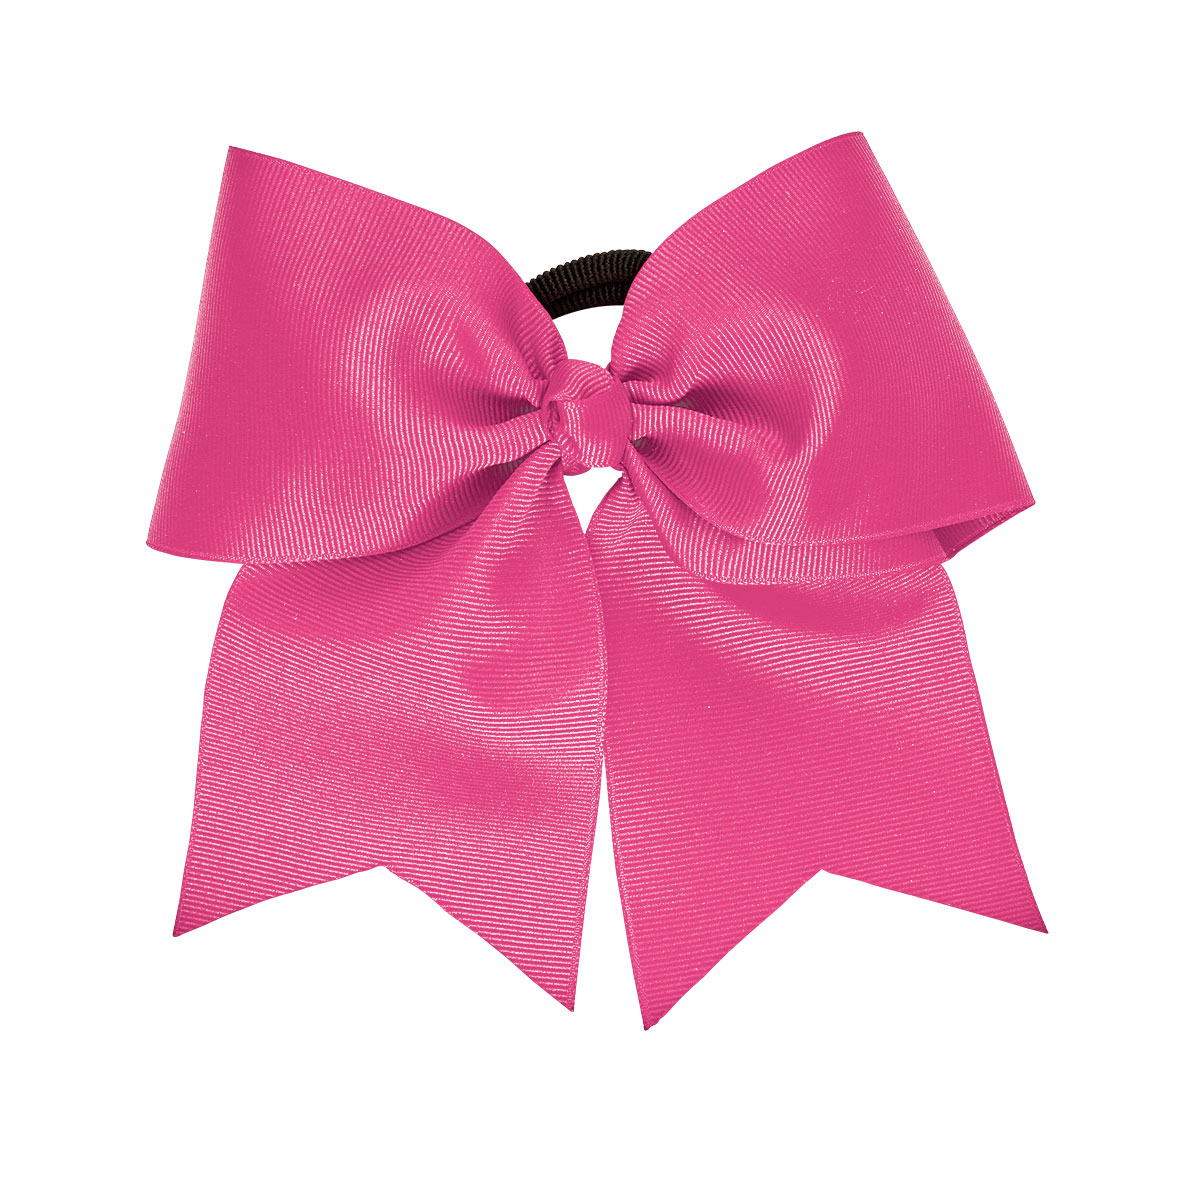 Extra Large 3" Hot Pink Grosgrain Bow with V-Cut Tails